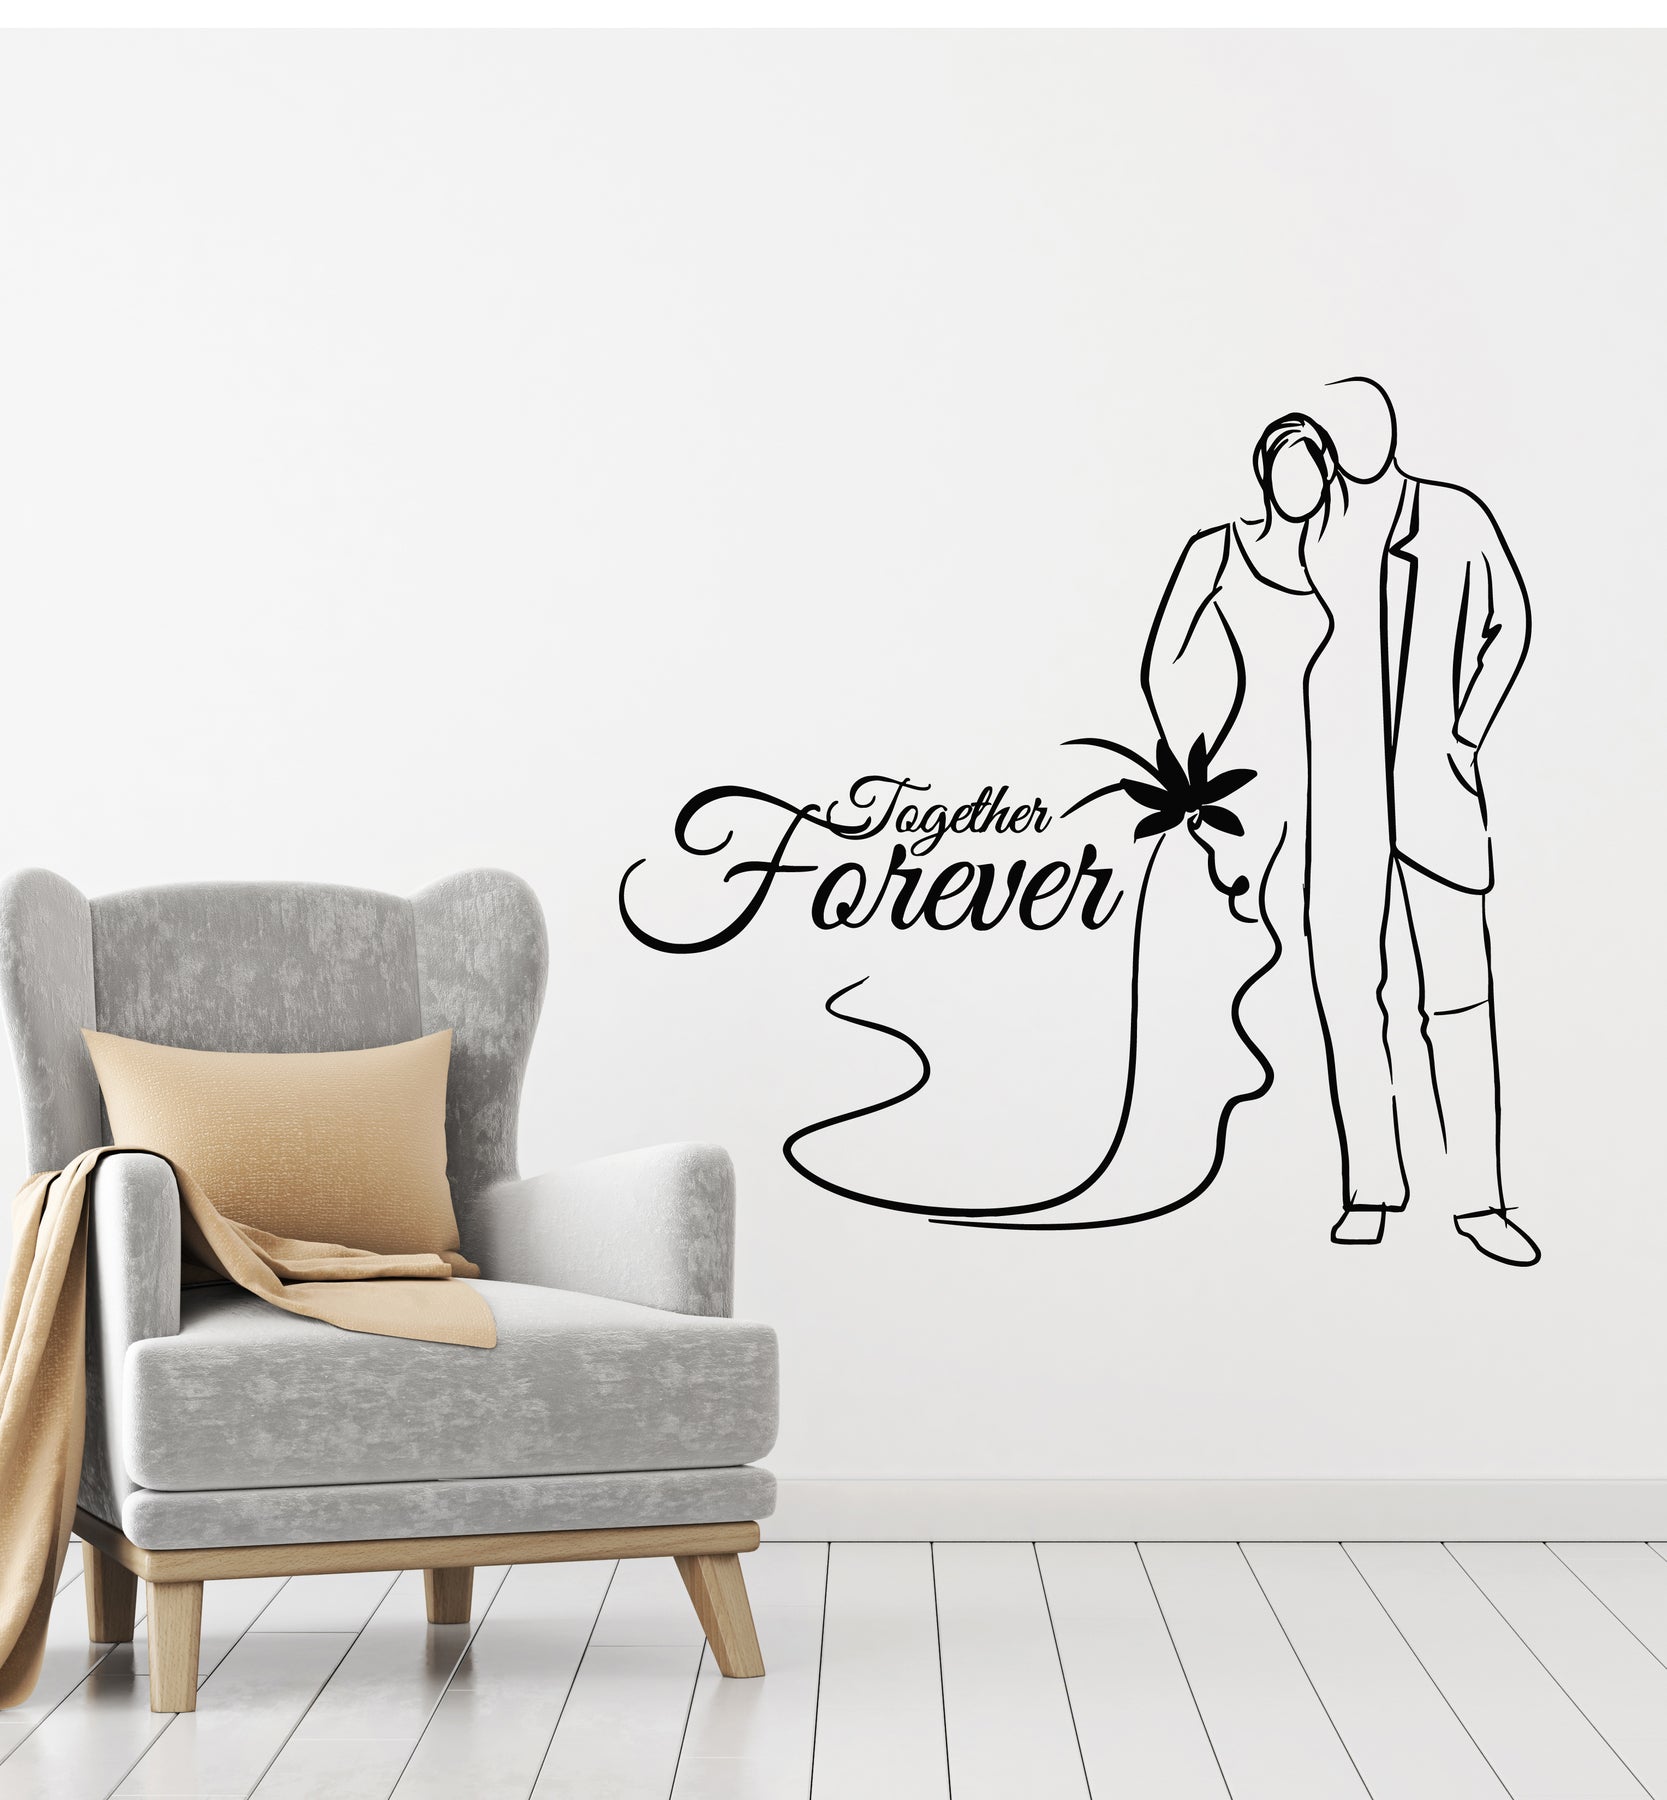 Our Love Never Fails Banner Heart Couple Relationship Marriage Wall Decals  for Walls Peel and Stick wall art murals Black Small 8 Inch 